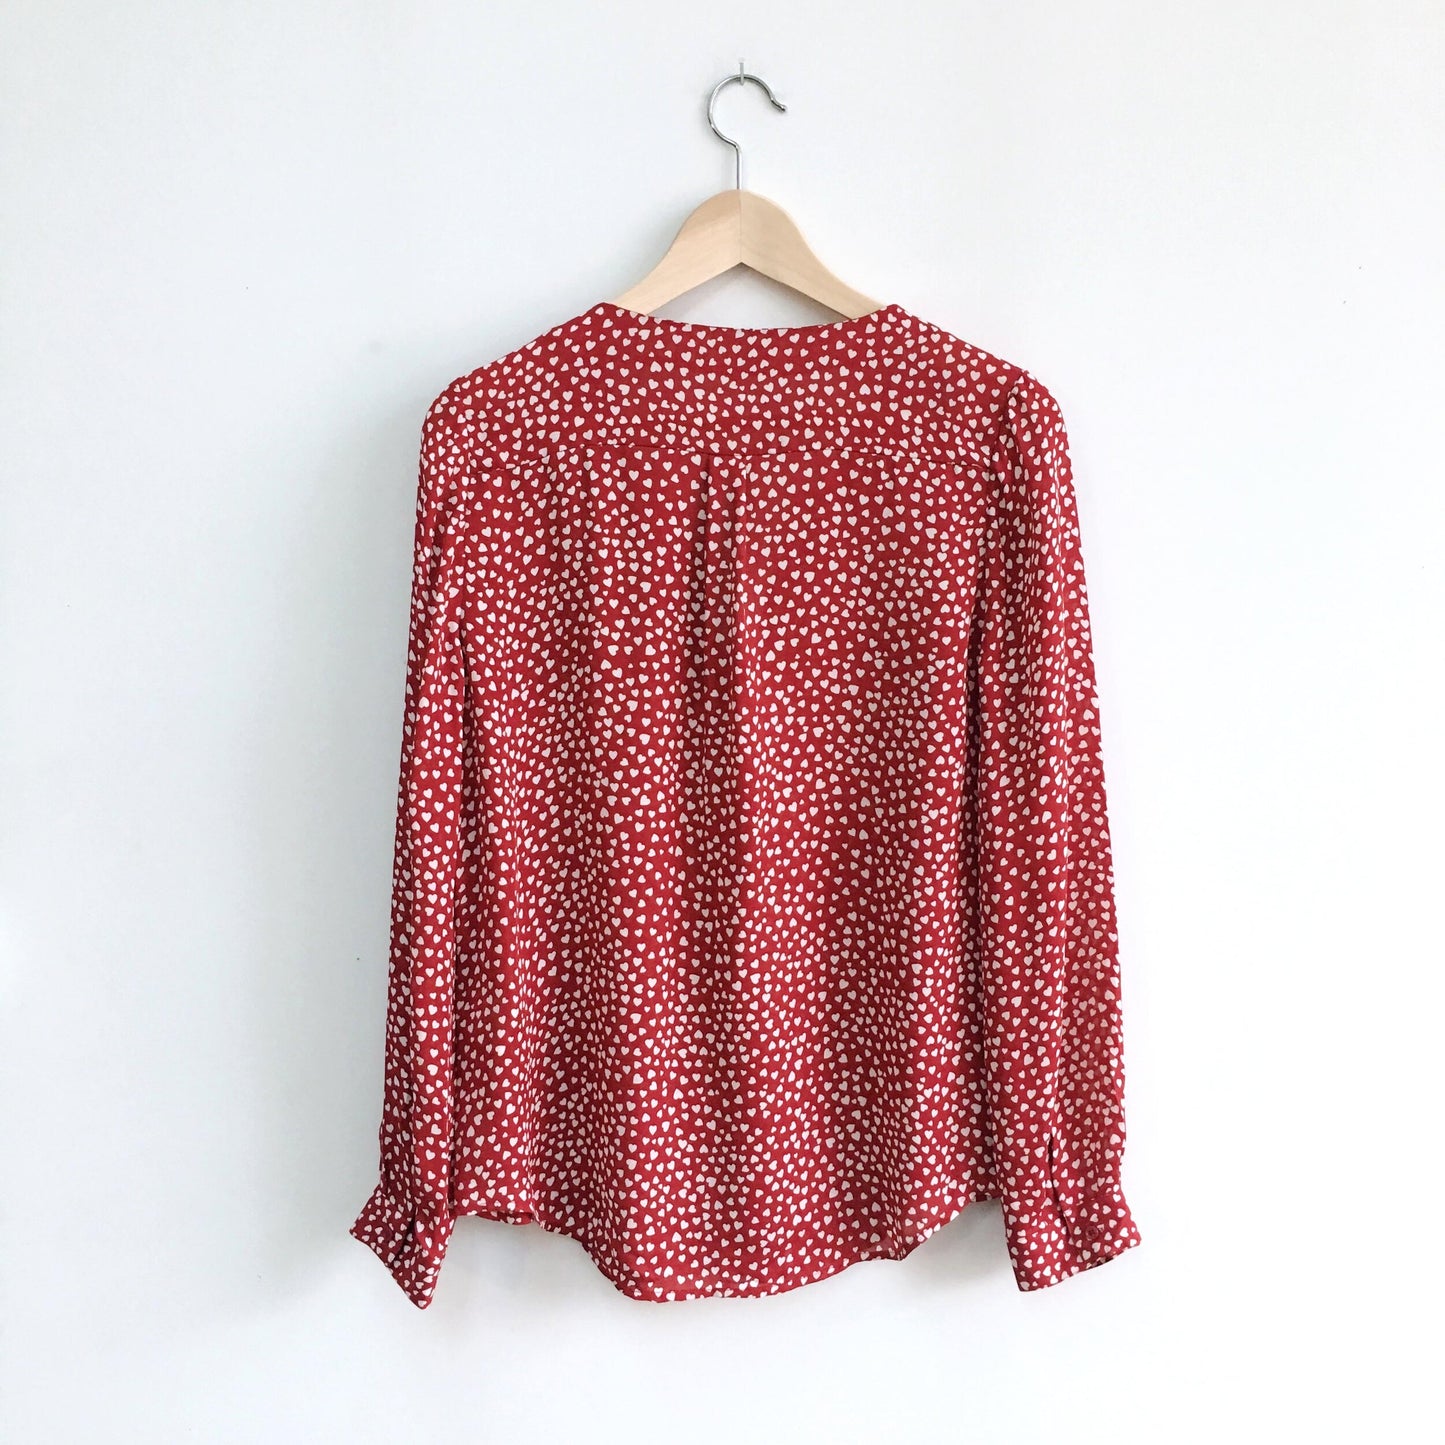 Joie Moemi Heart Blouse - size Small